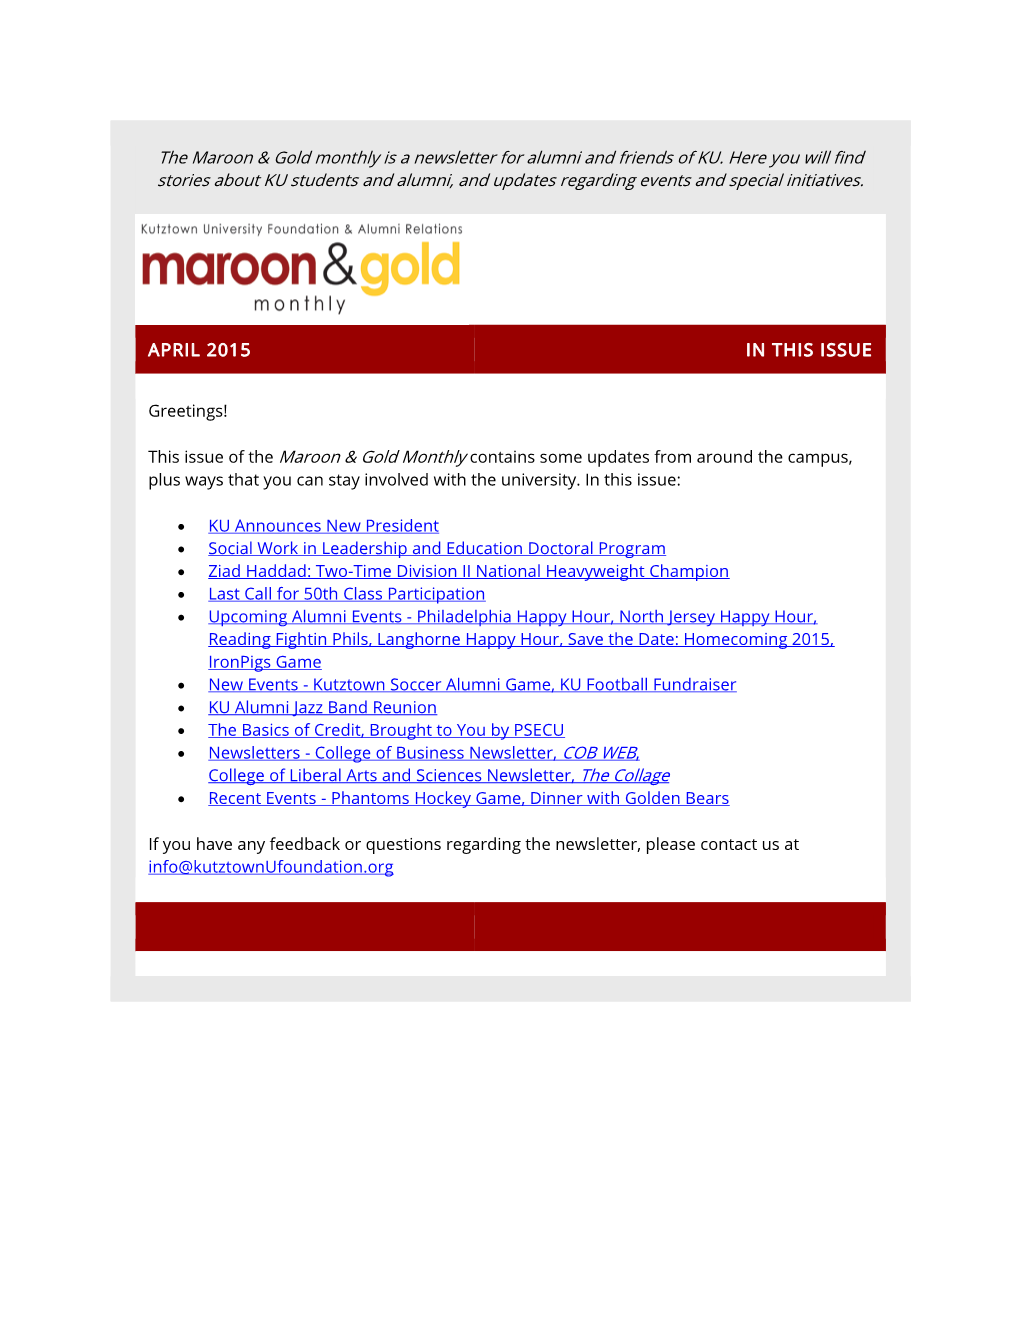 The Maroon & Gold Monthly Is a Newsletter for Alumni and Friends Of